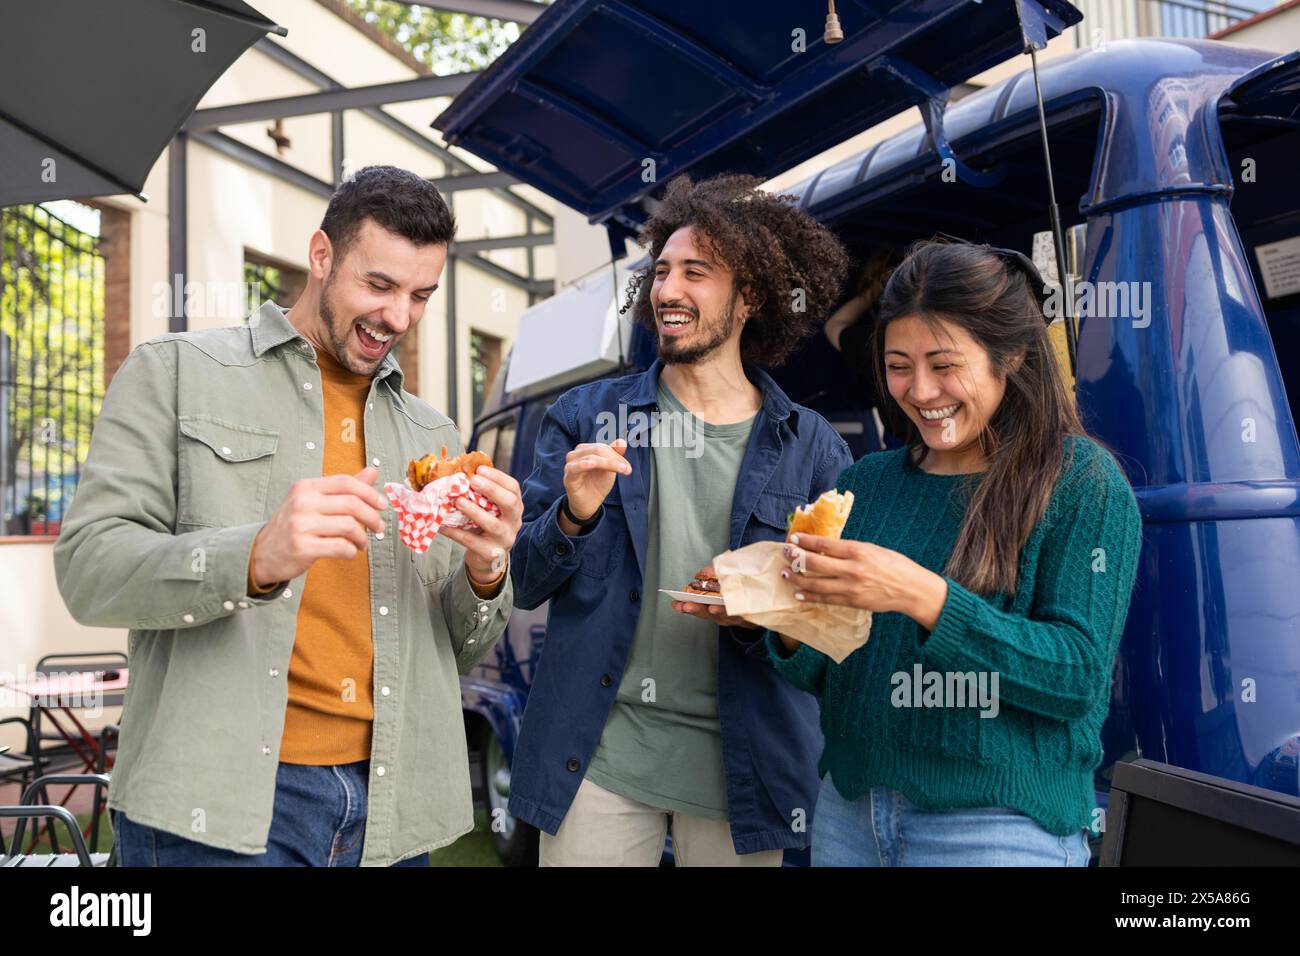 Three happy friends enjoy street food by a vibrant blue food truck, laughing and sharing a sunny moment together Stock Photo